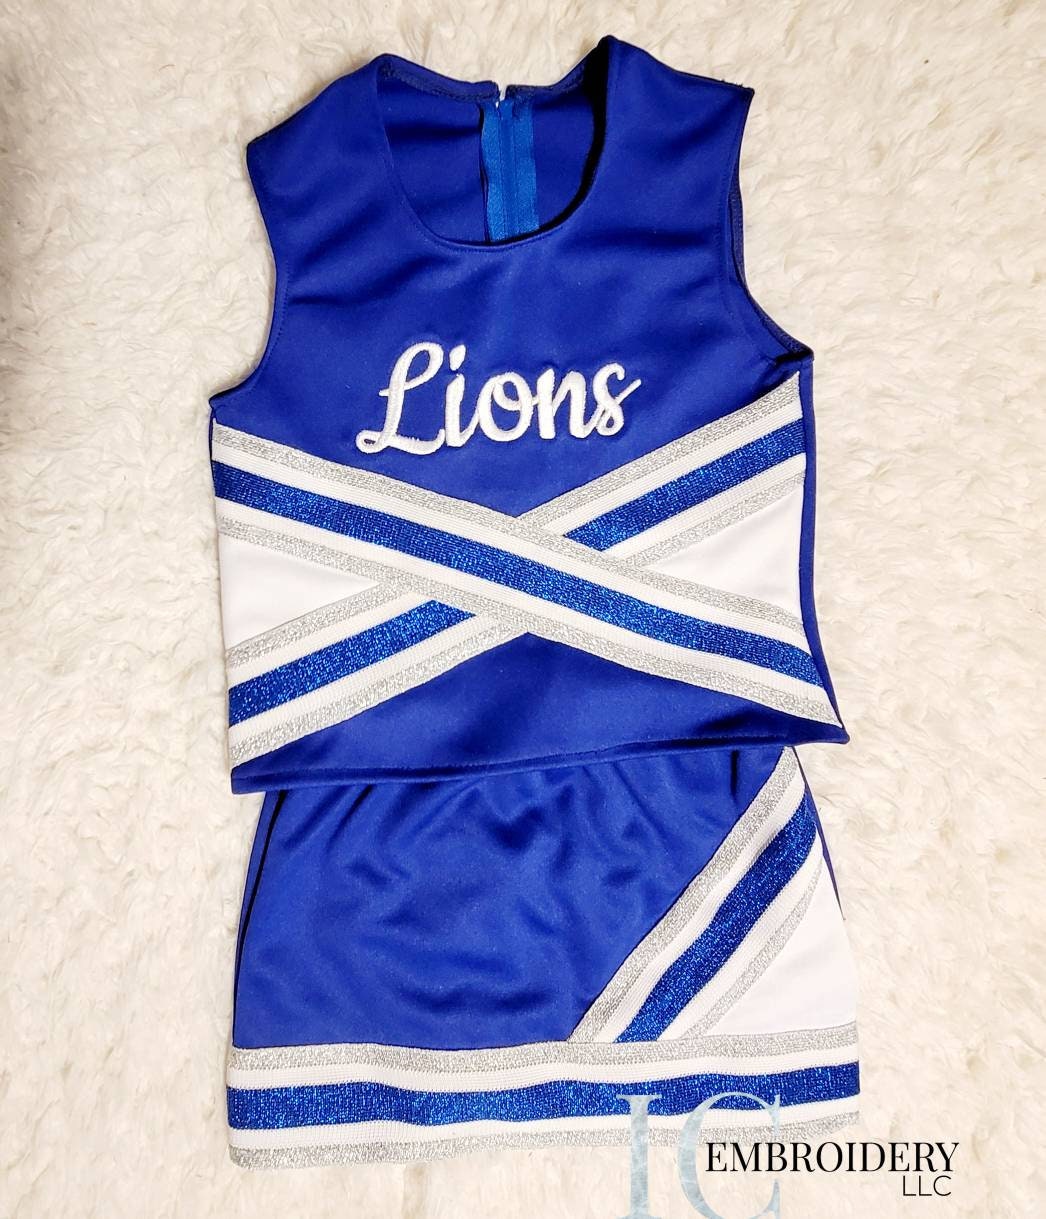 Blue and White Cheer Uniform Cougars Cheer Uniform - Etsy